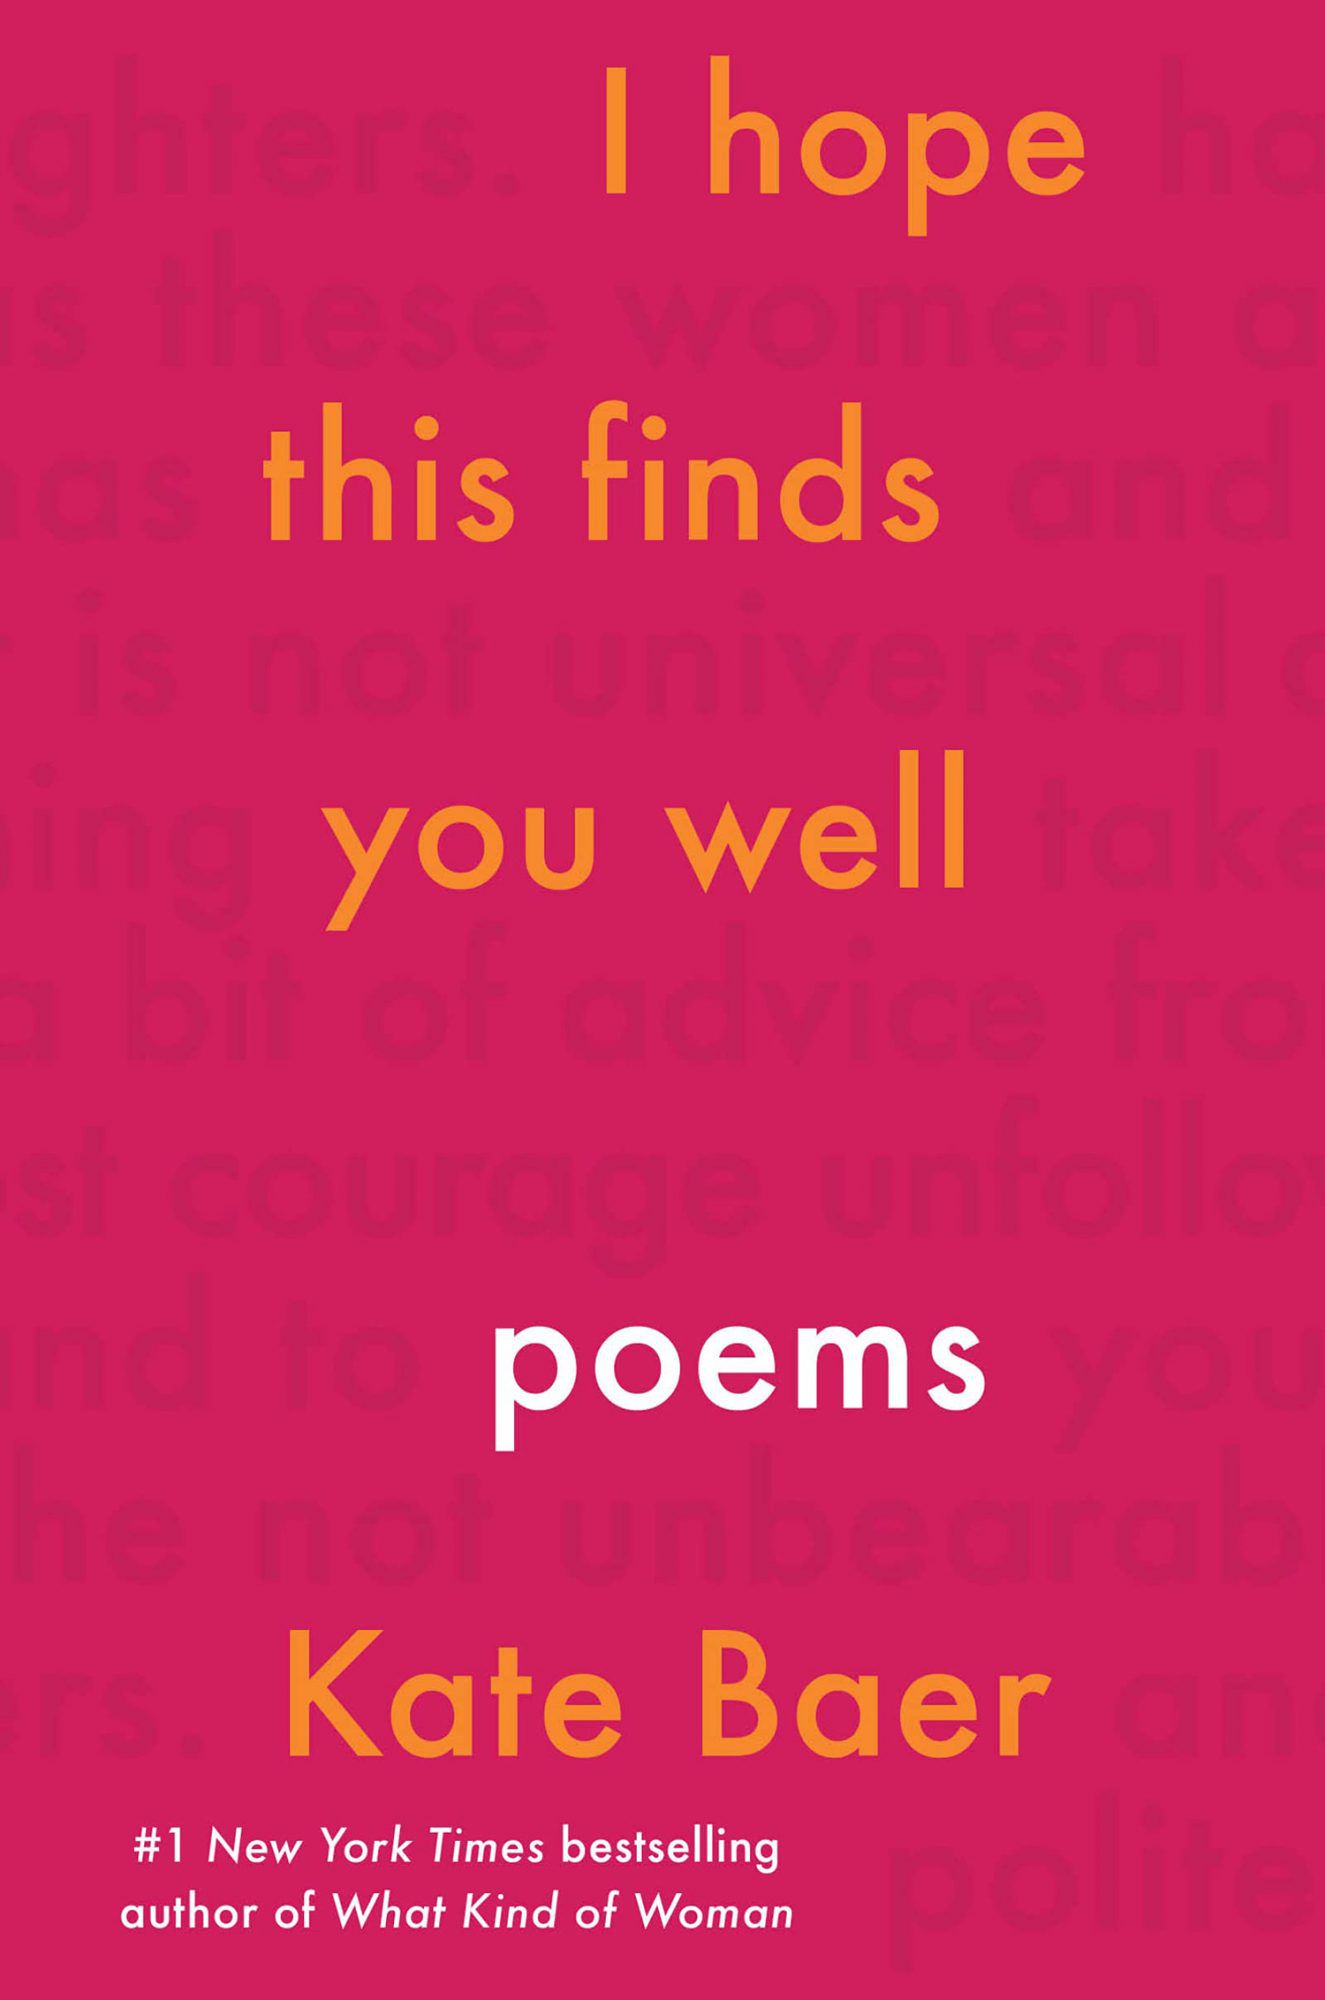 I Hope This Finds You Well, by Kate Baer